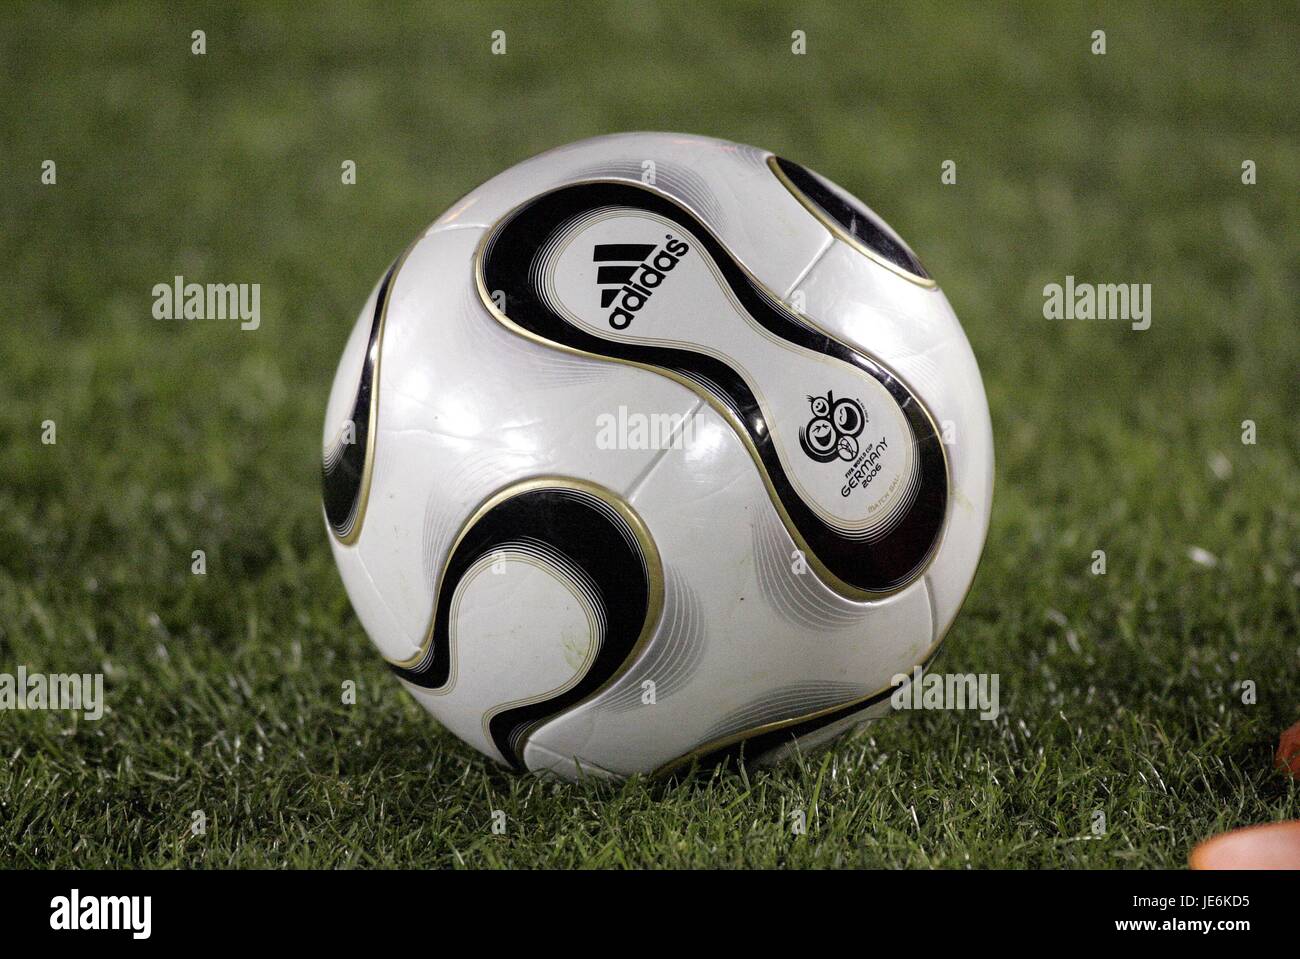 2006 WORLD CUP BALL 2006 WORLD CUP BALL LOS ANGELES MEMORIAL COLISEUM LOS ANGELES USA 15 February 2006 Stock Photo